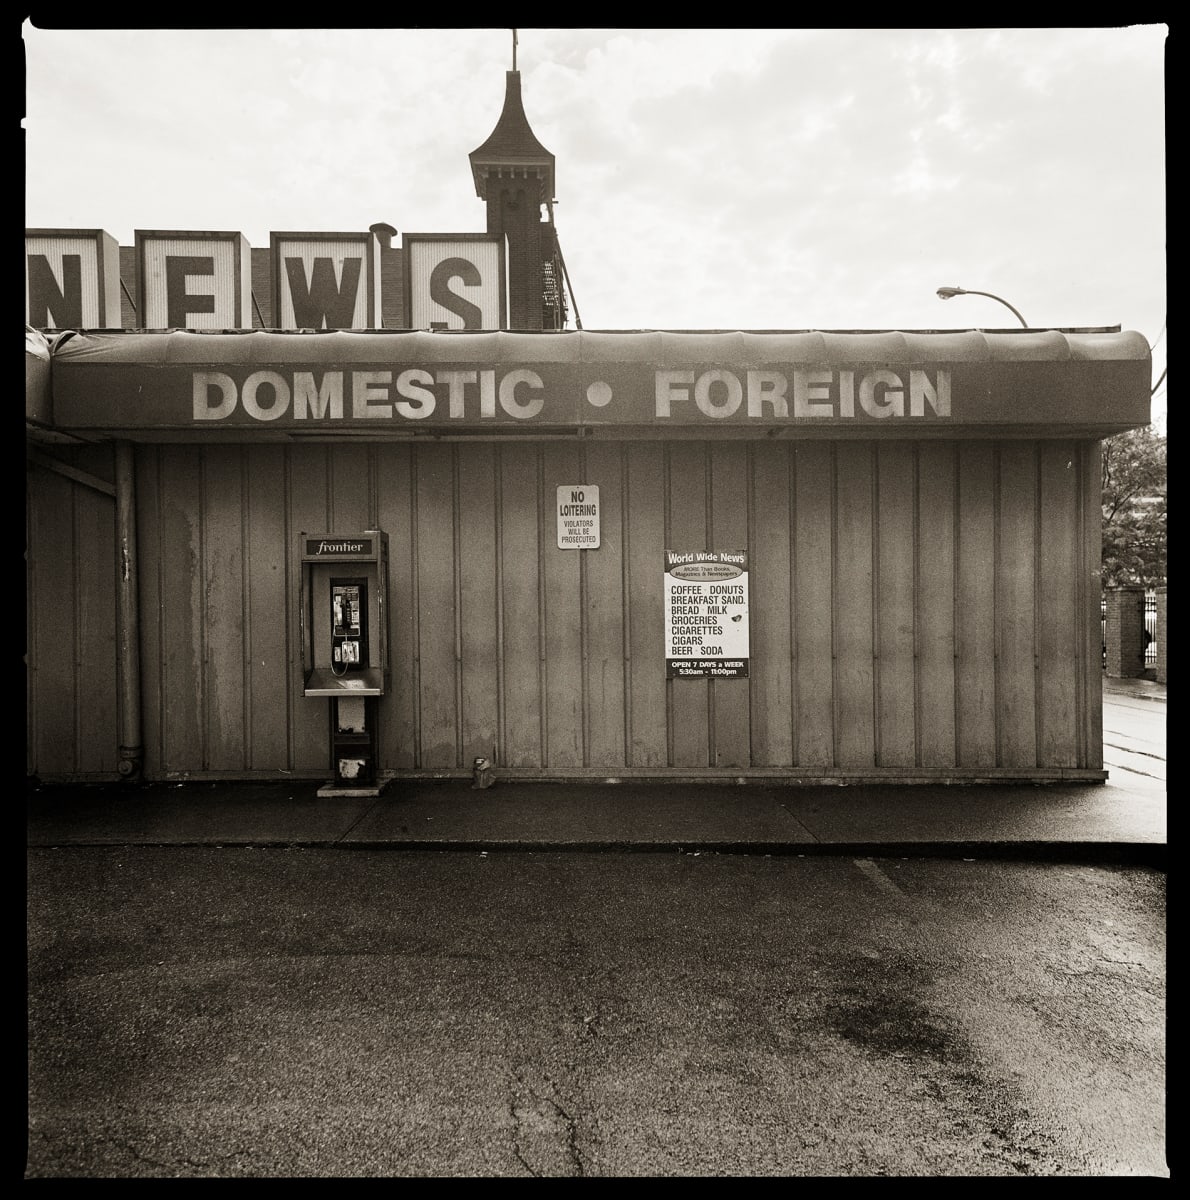 585.232.9376 – World Wide News, 100 Saint Paul Street, Rochester, NY 14604 by Eric T. Kunsman  Image: ID: A black and white image shows a building with signs for News Domestic and Foreign.  Under the signage on the overhang there is a payphone.